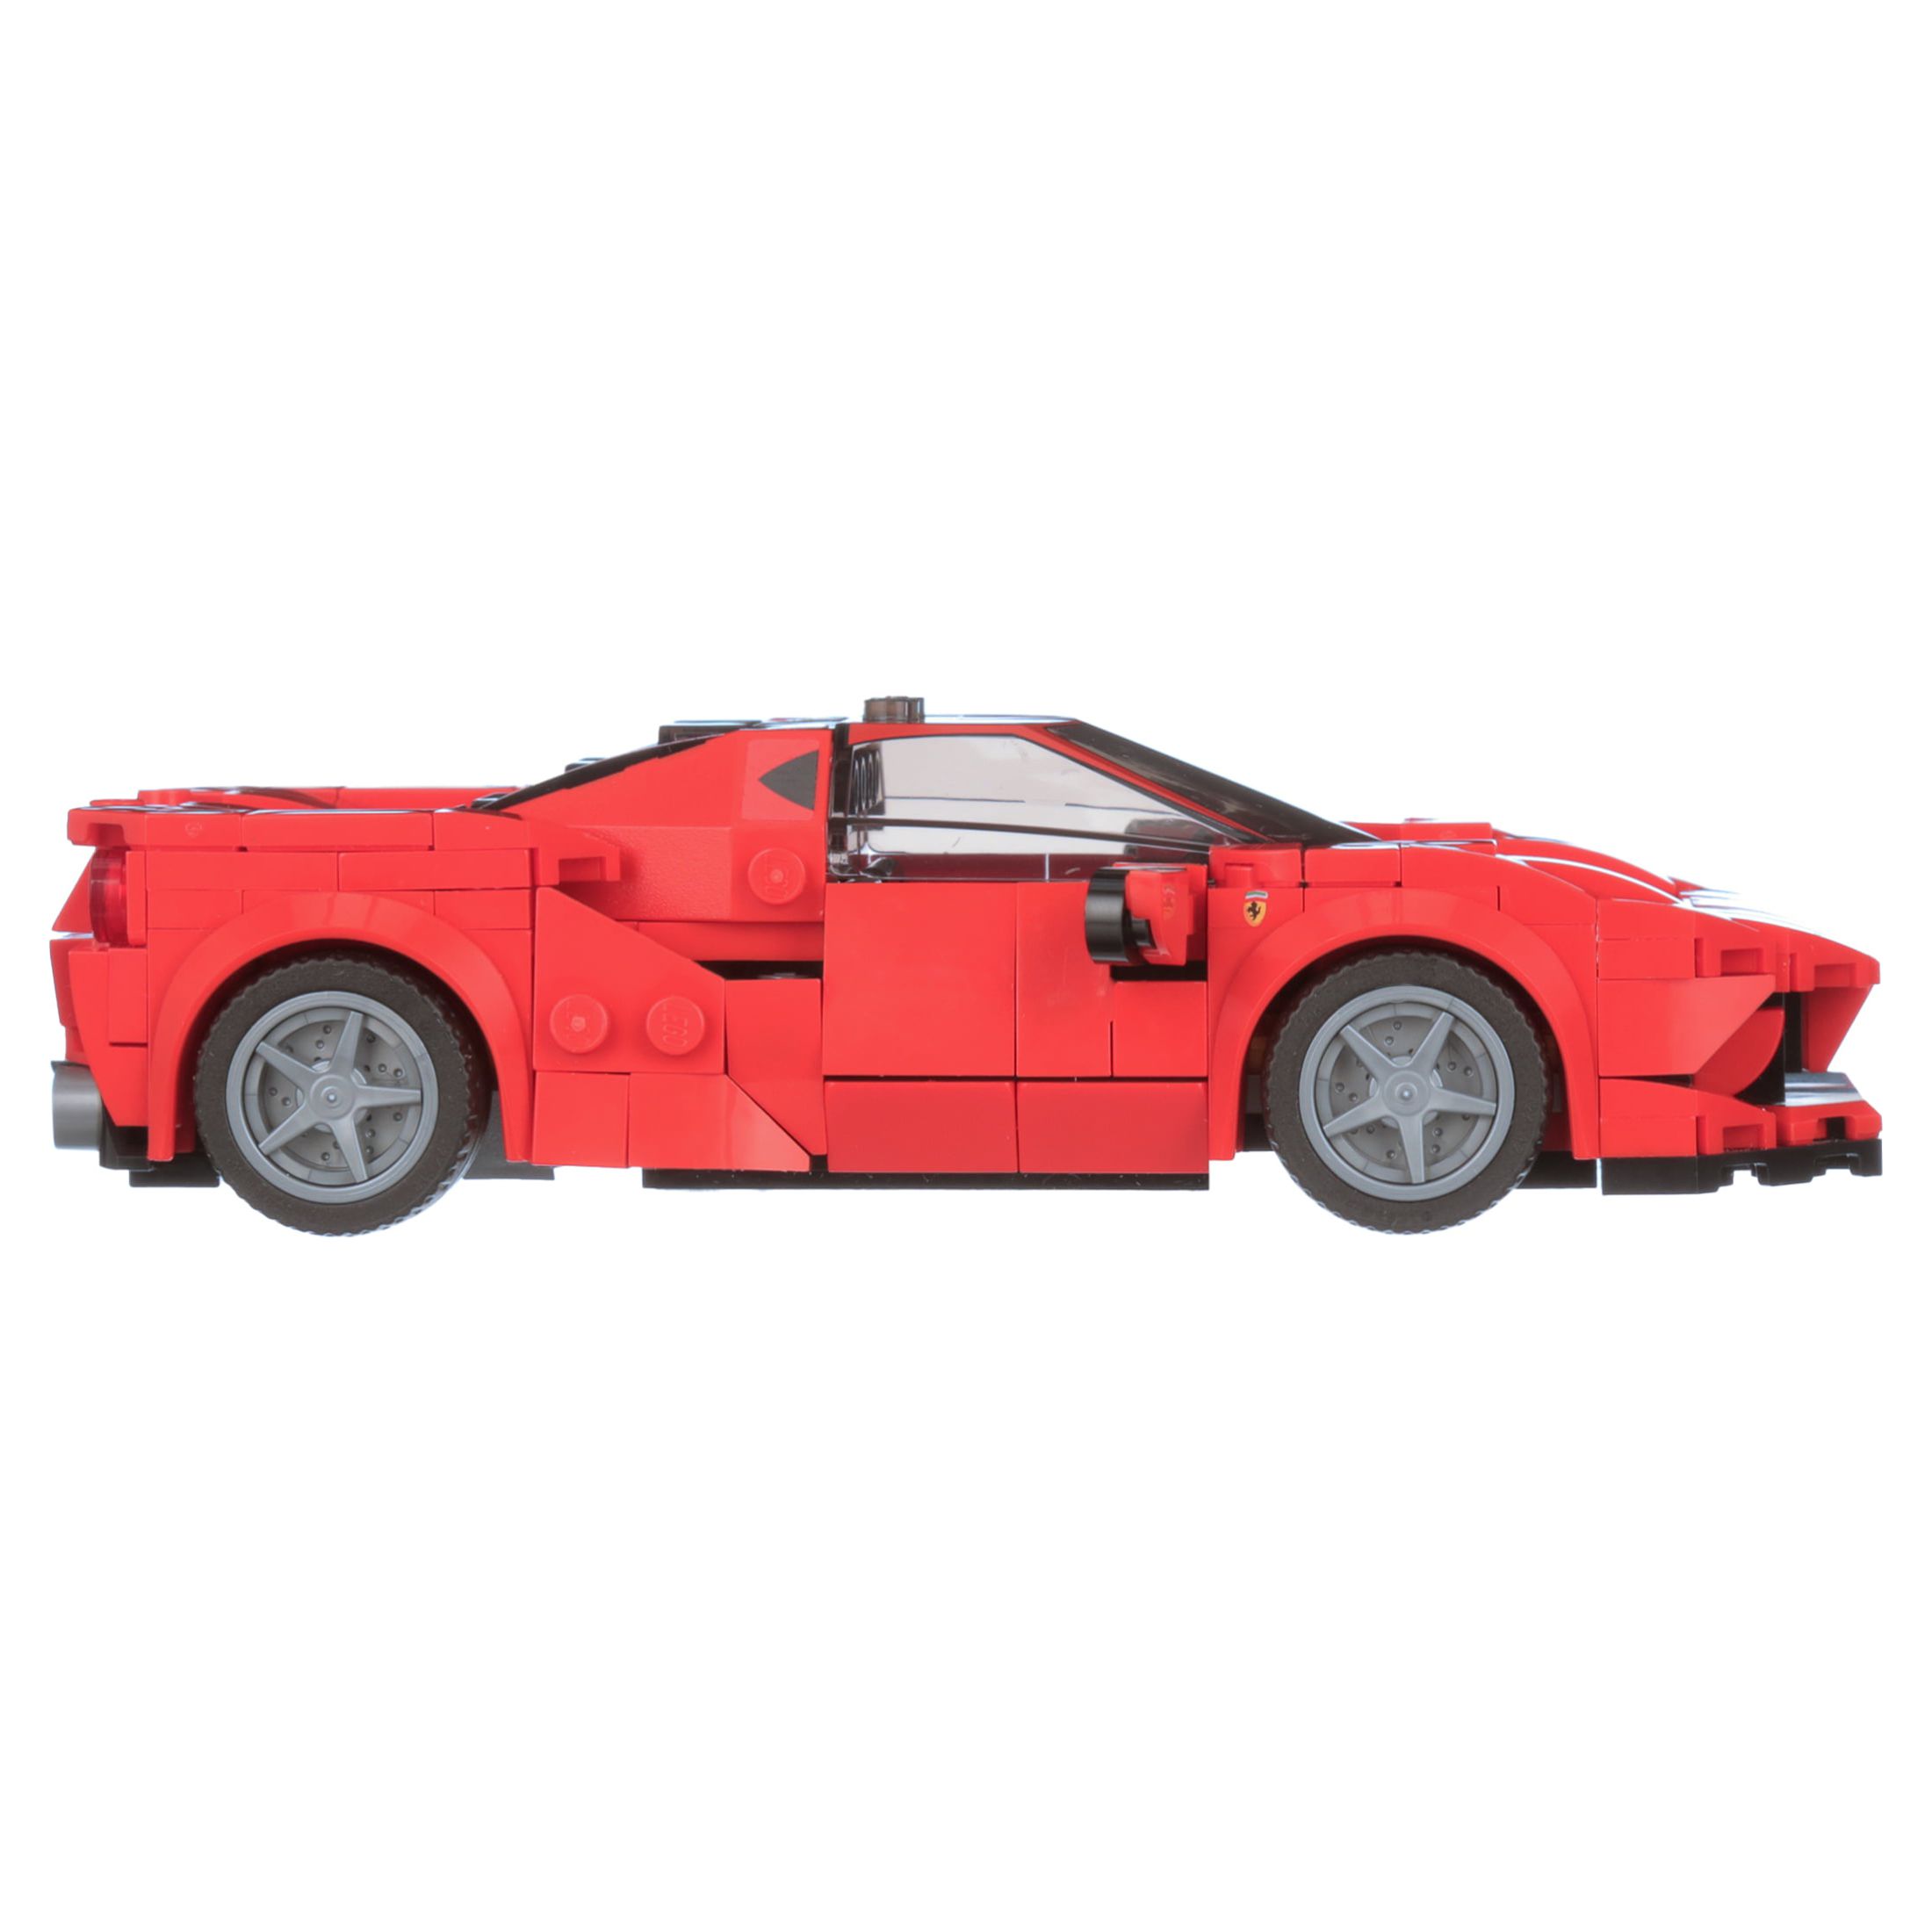 LEGO Speed Champions 76895 Ferrari F8 Tributo Racing Model Car, Vehicle Building Car (275 pieces) - image 12 of 12